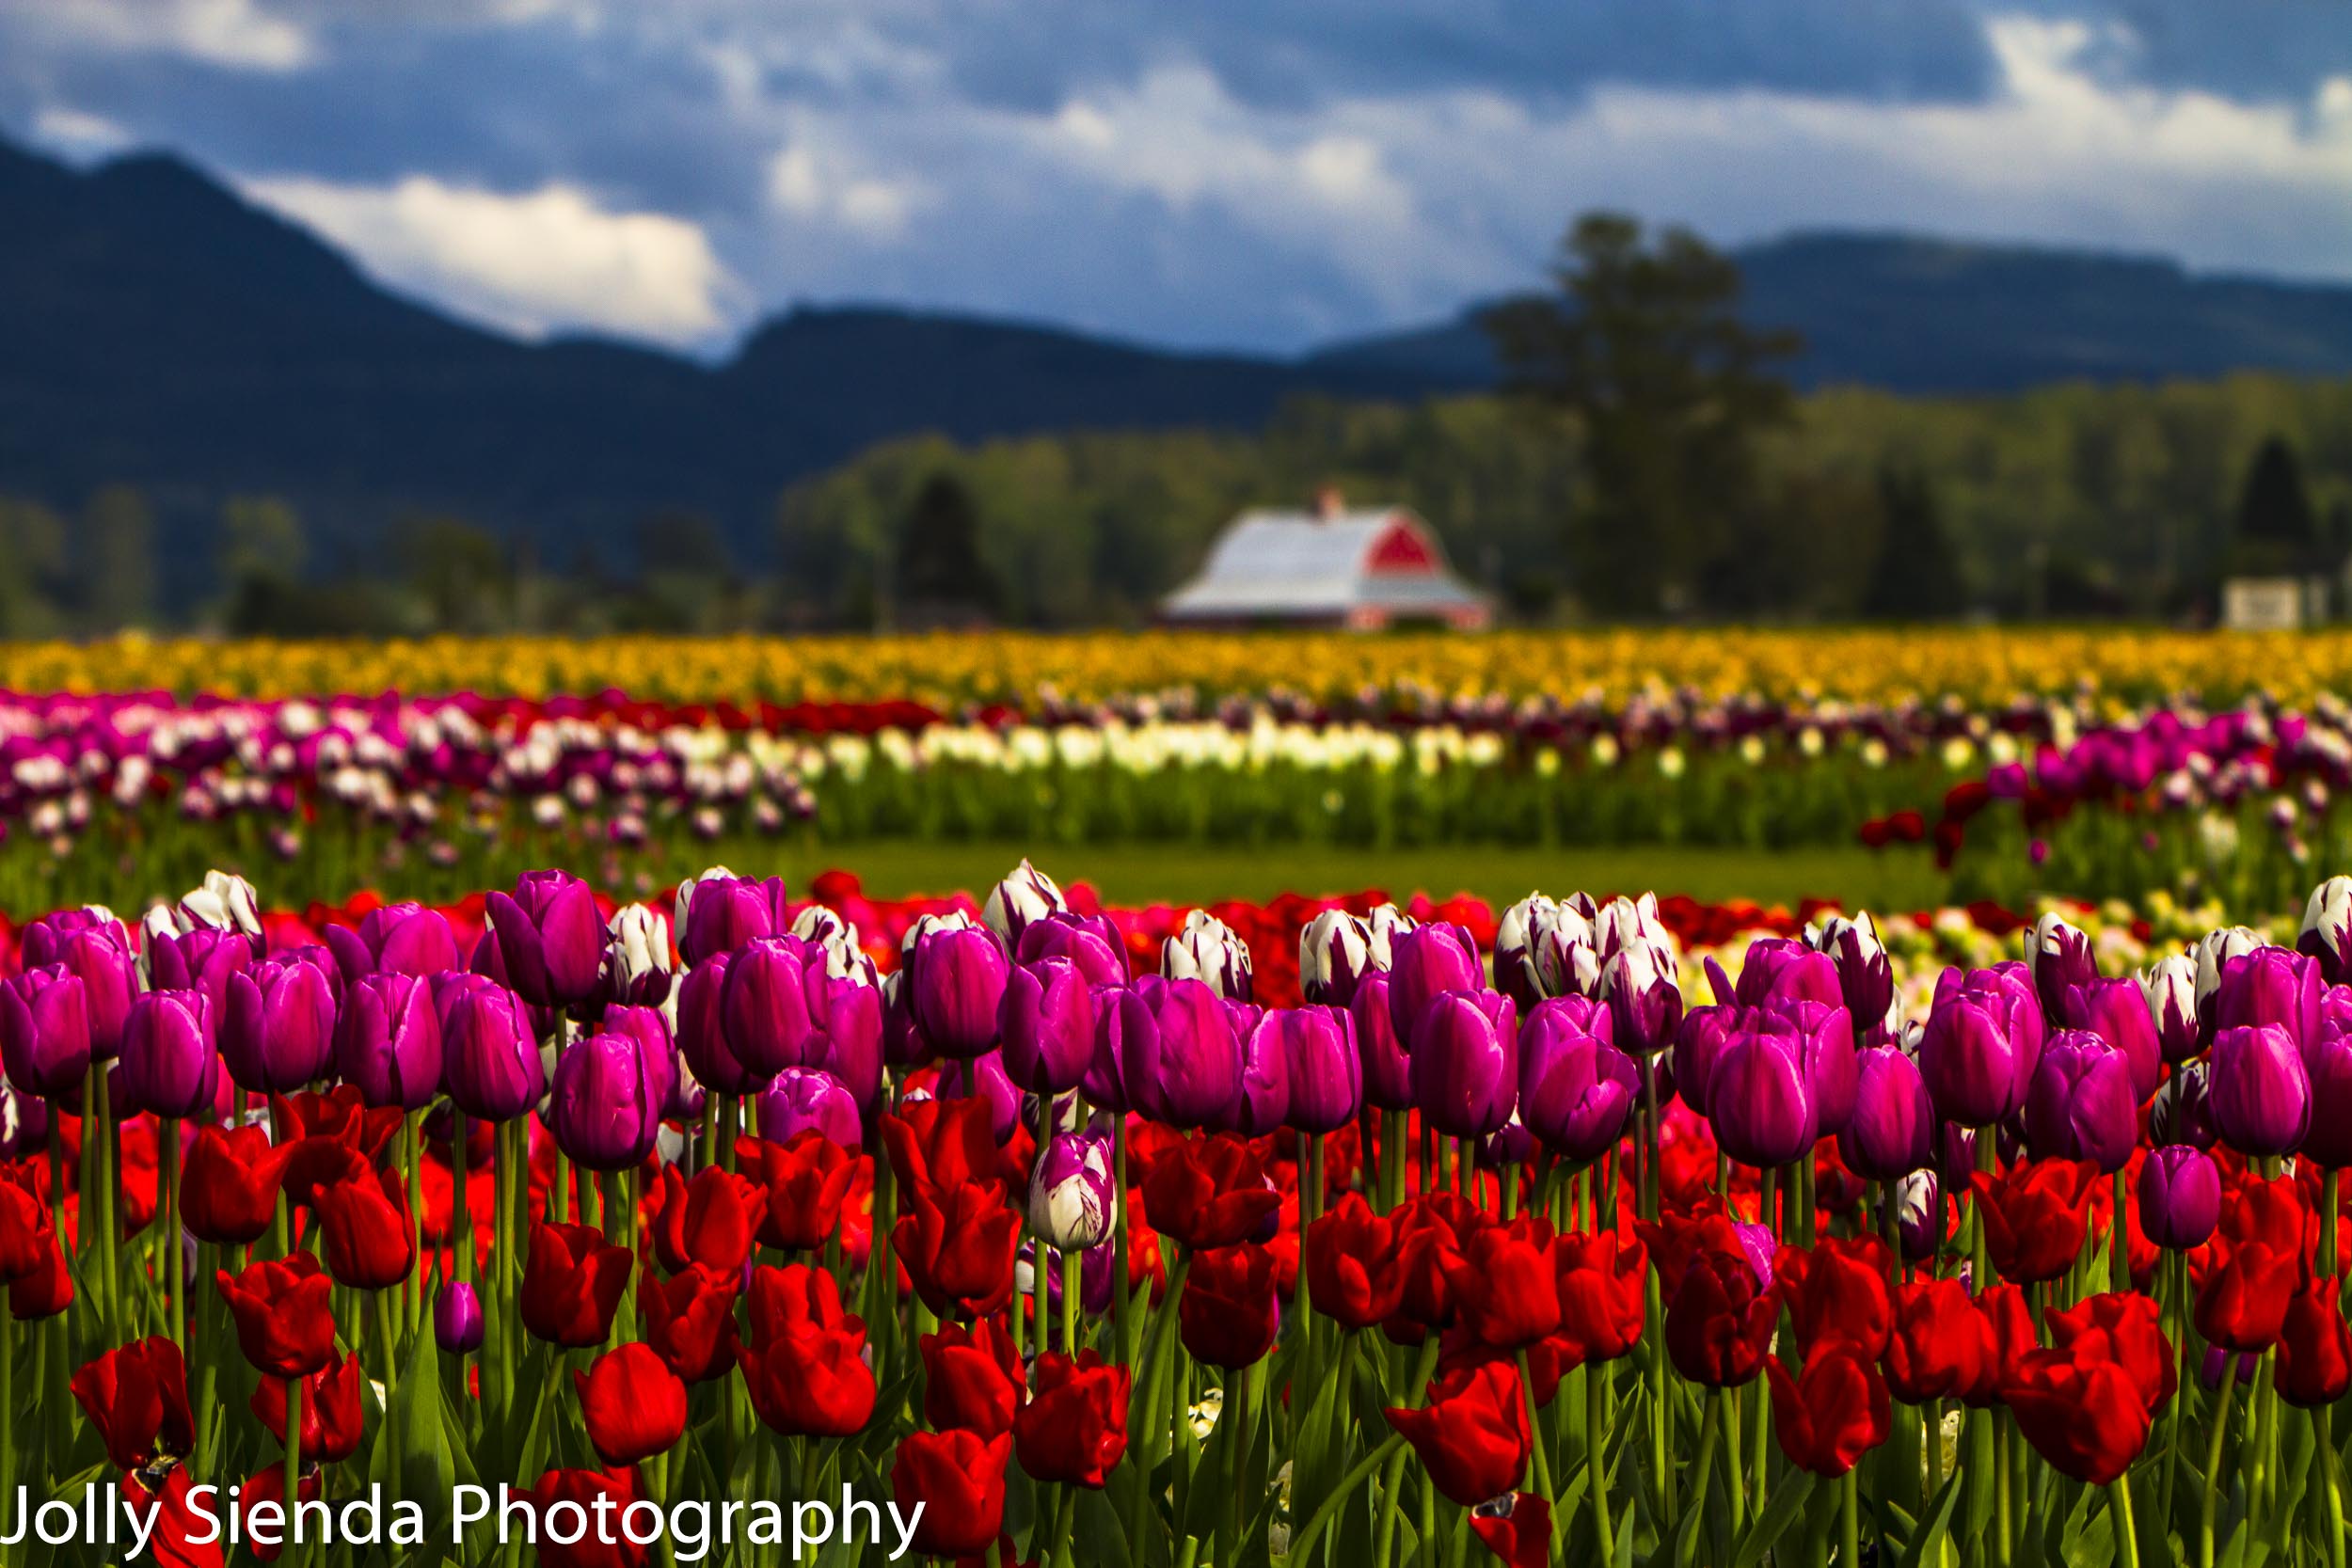 Field of colored tulips stand tall and make patterns with a red 